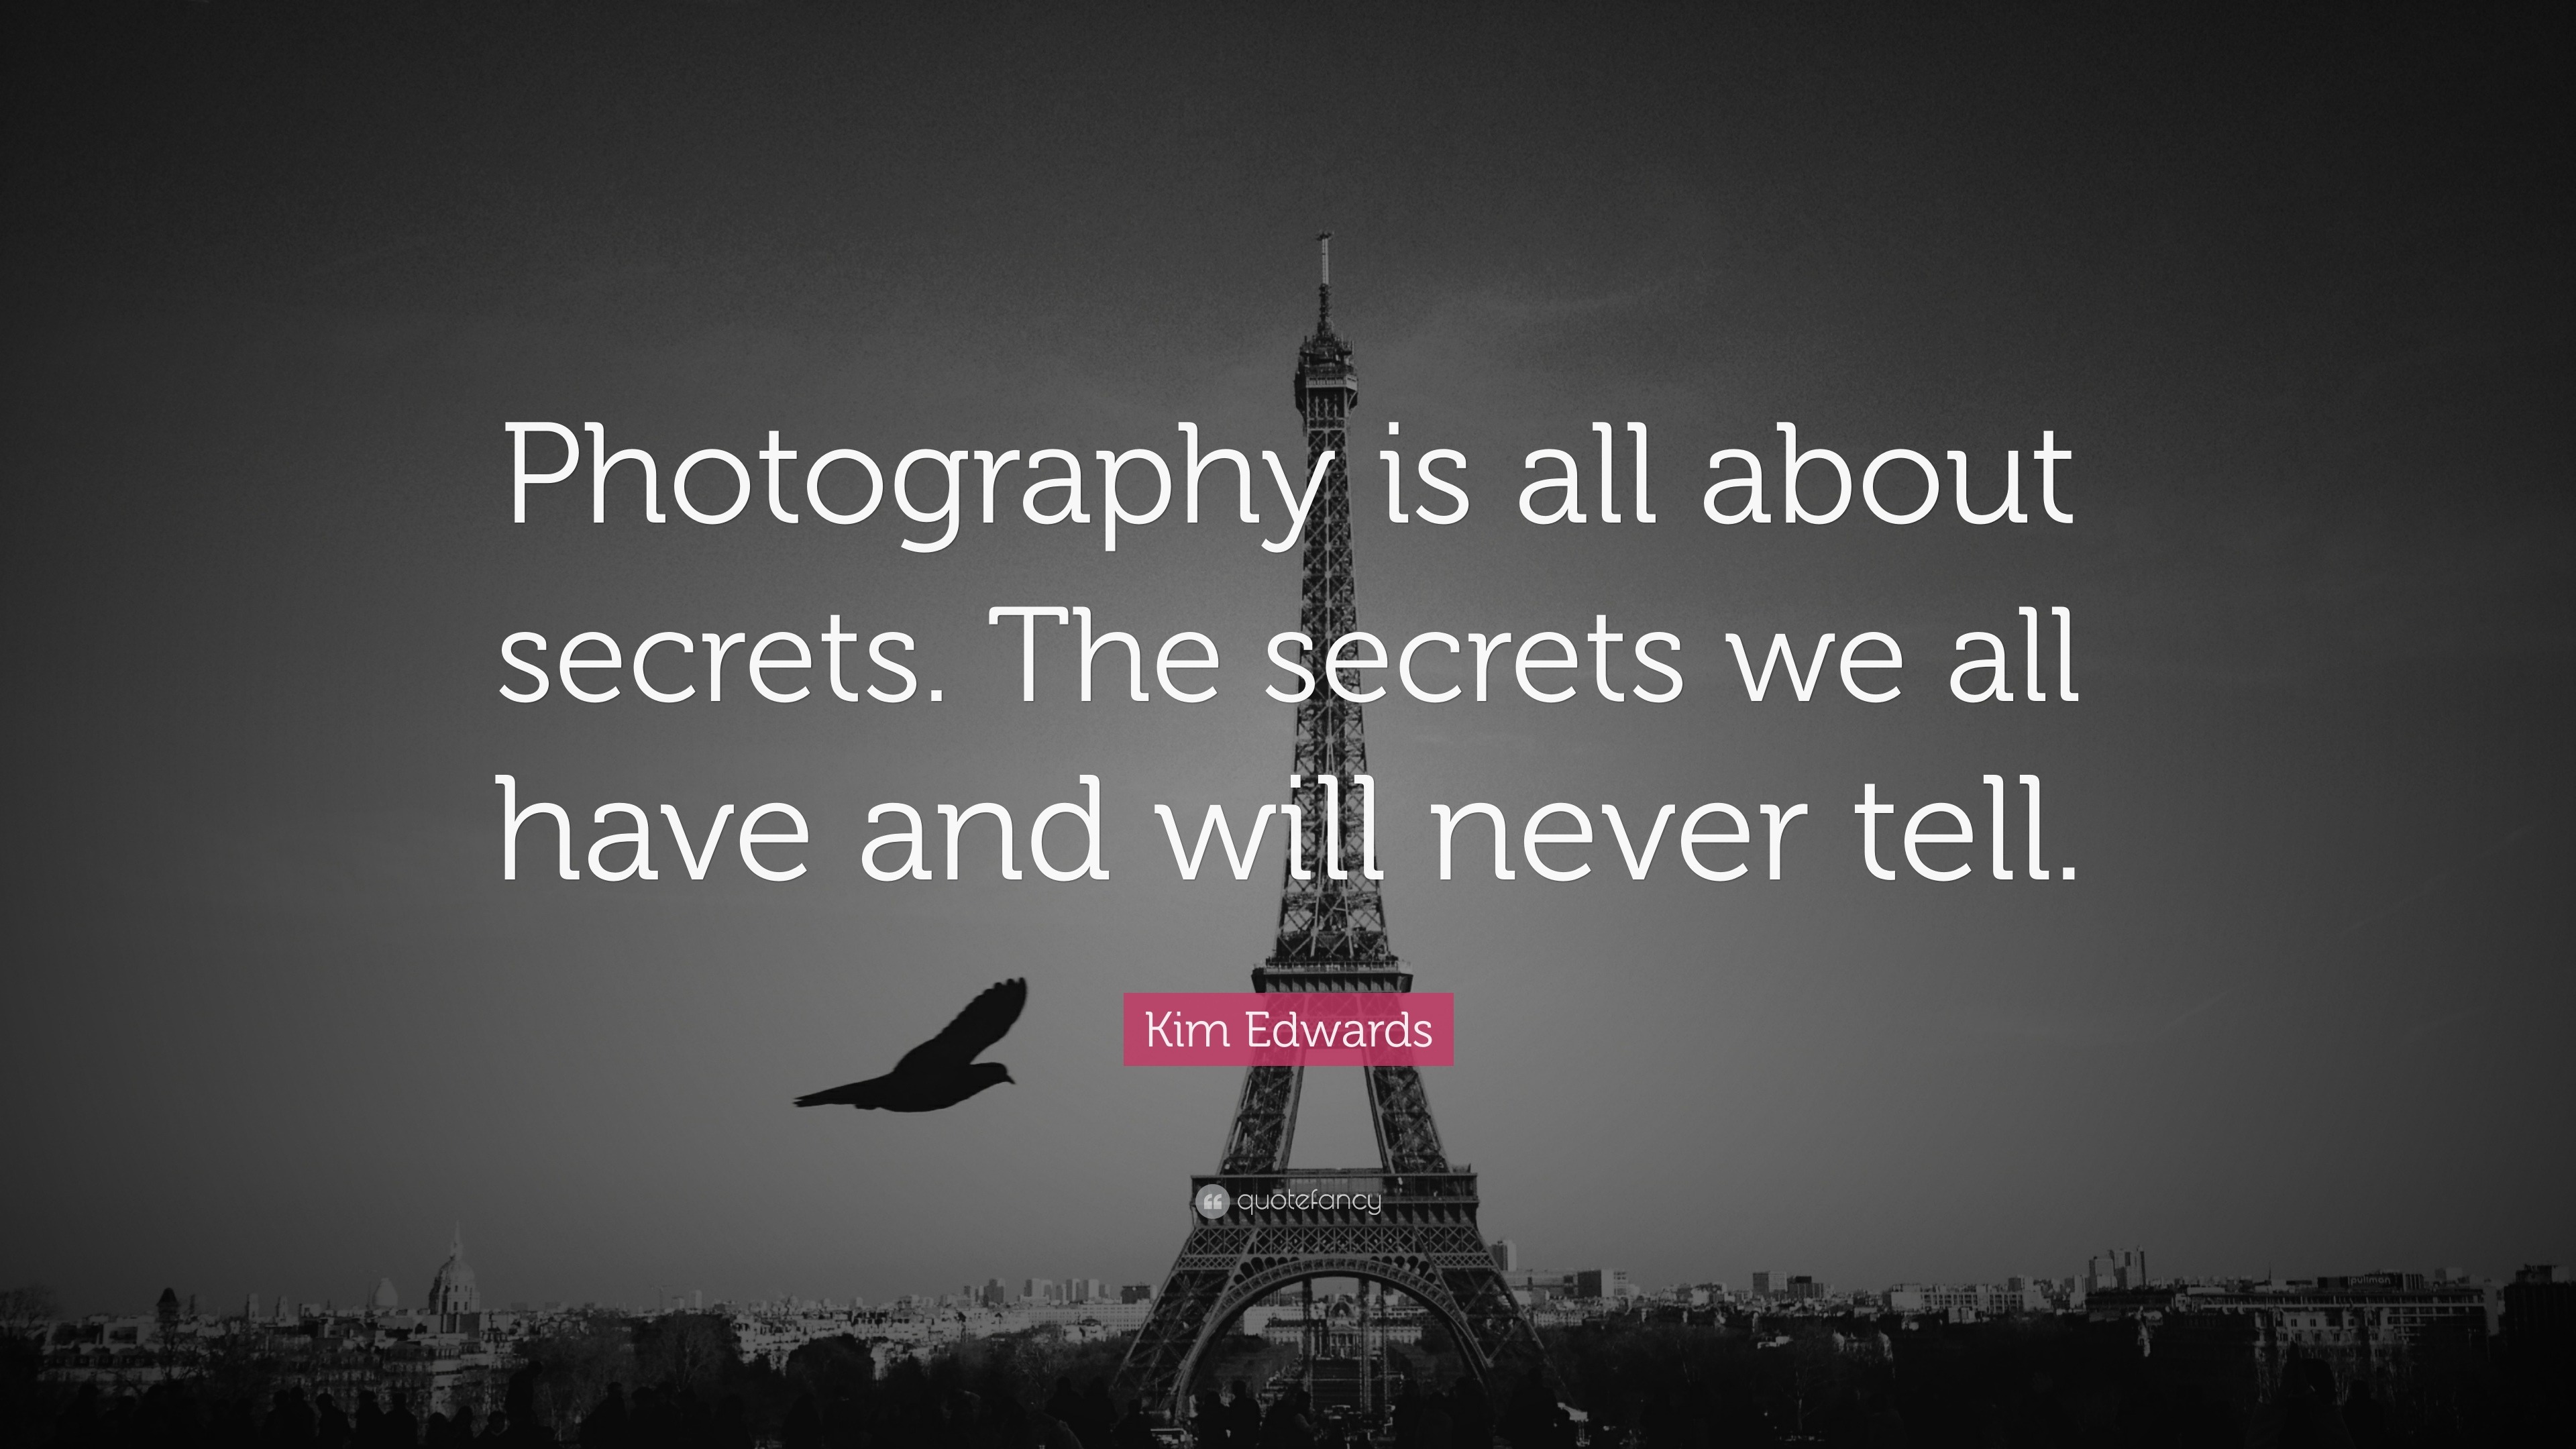 quotes for photo essay